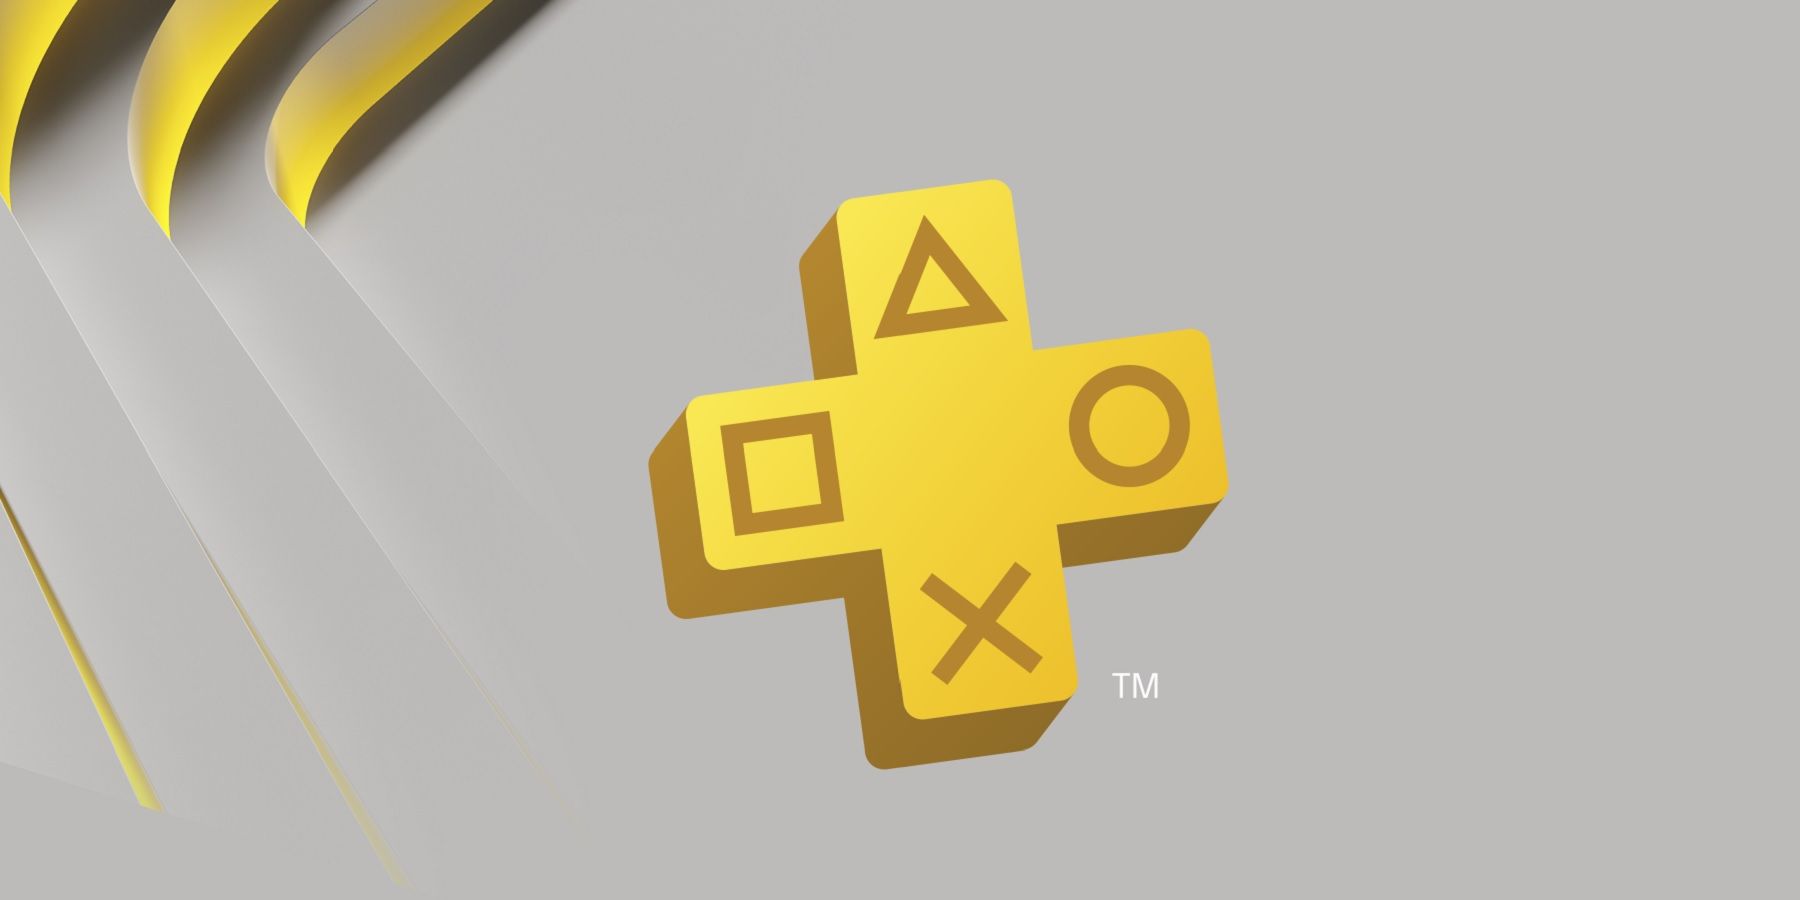 ps plus logo grey and yellow background